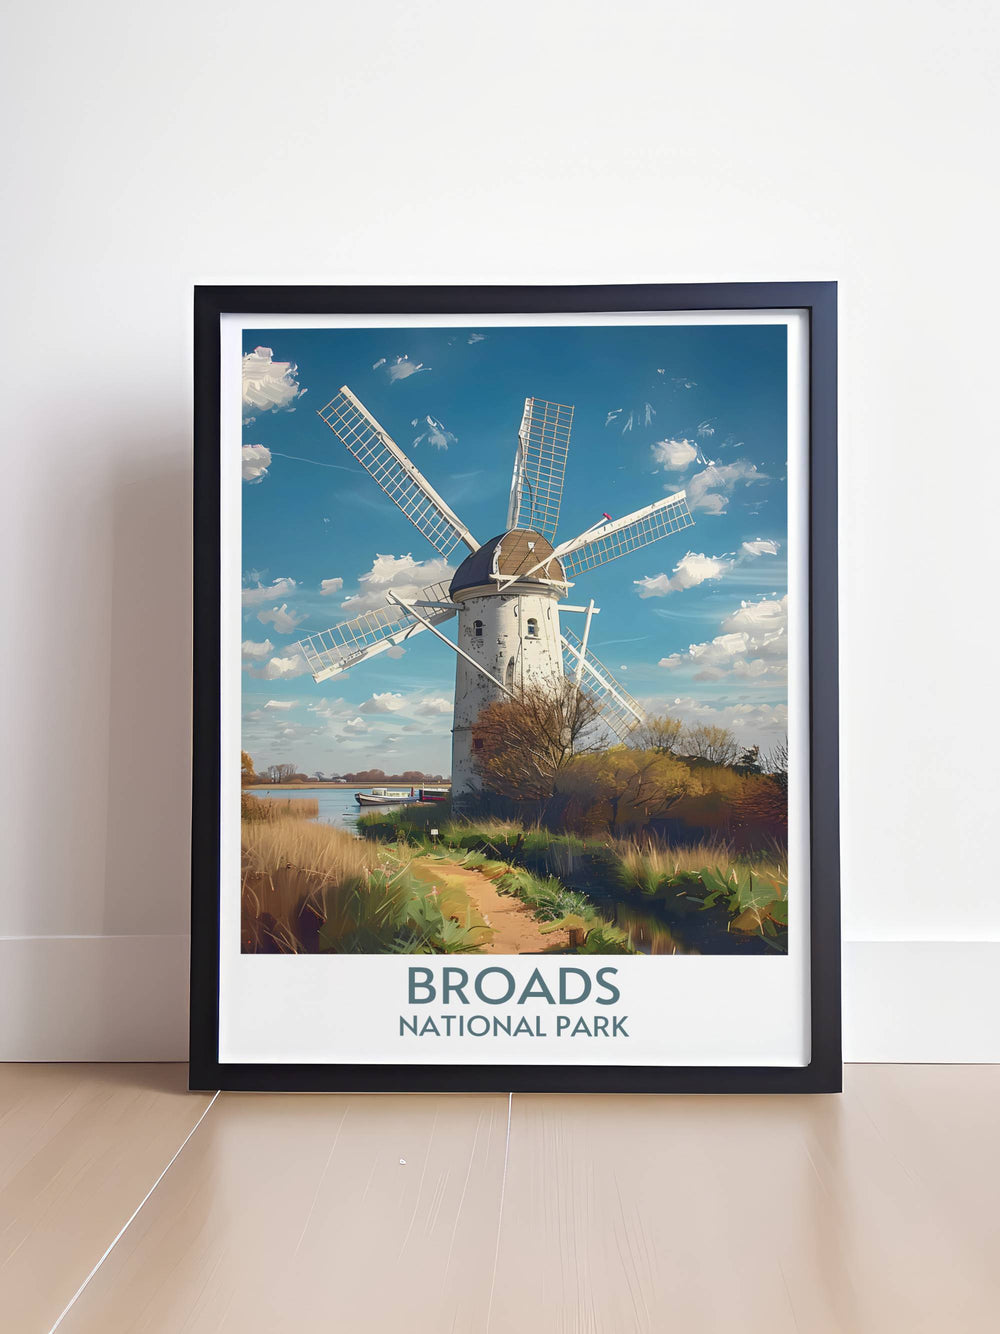 Enhance your living space with a Thurne Windmill wall art piece. This artwork showcases the historic and picturesque Thurne Windmill, bringing the tranquil landscapes of the Norfolk Broads into your home with a vintage travel poster style.